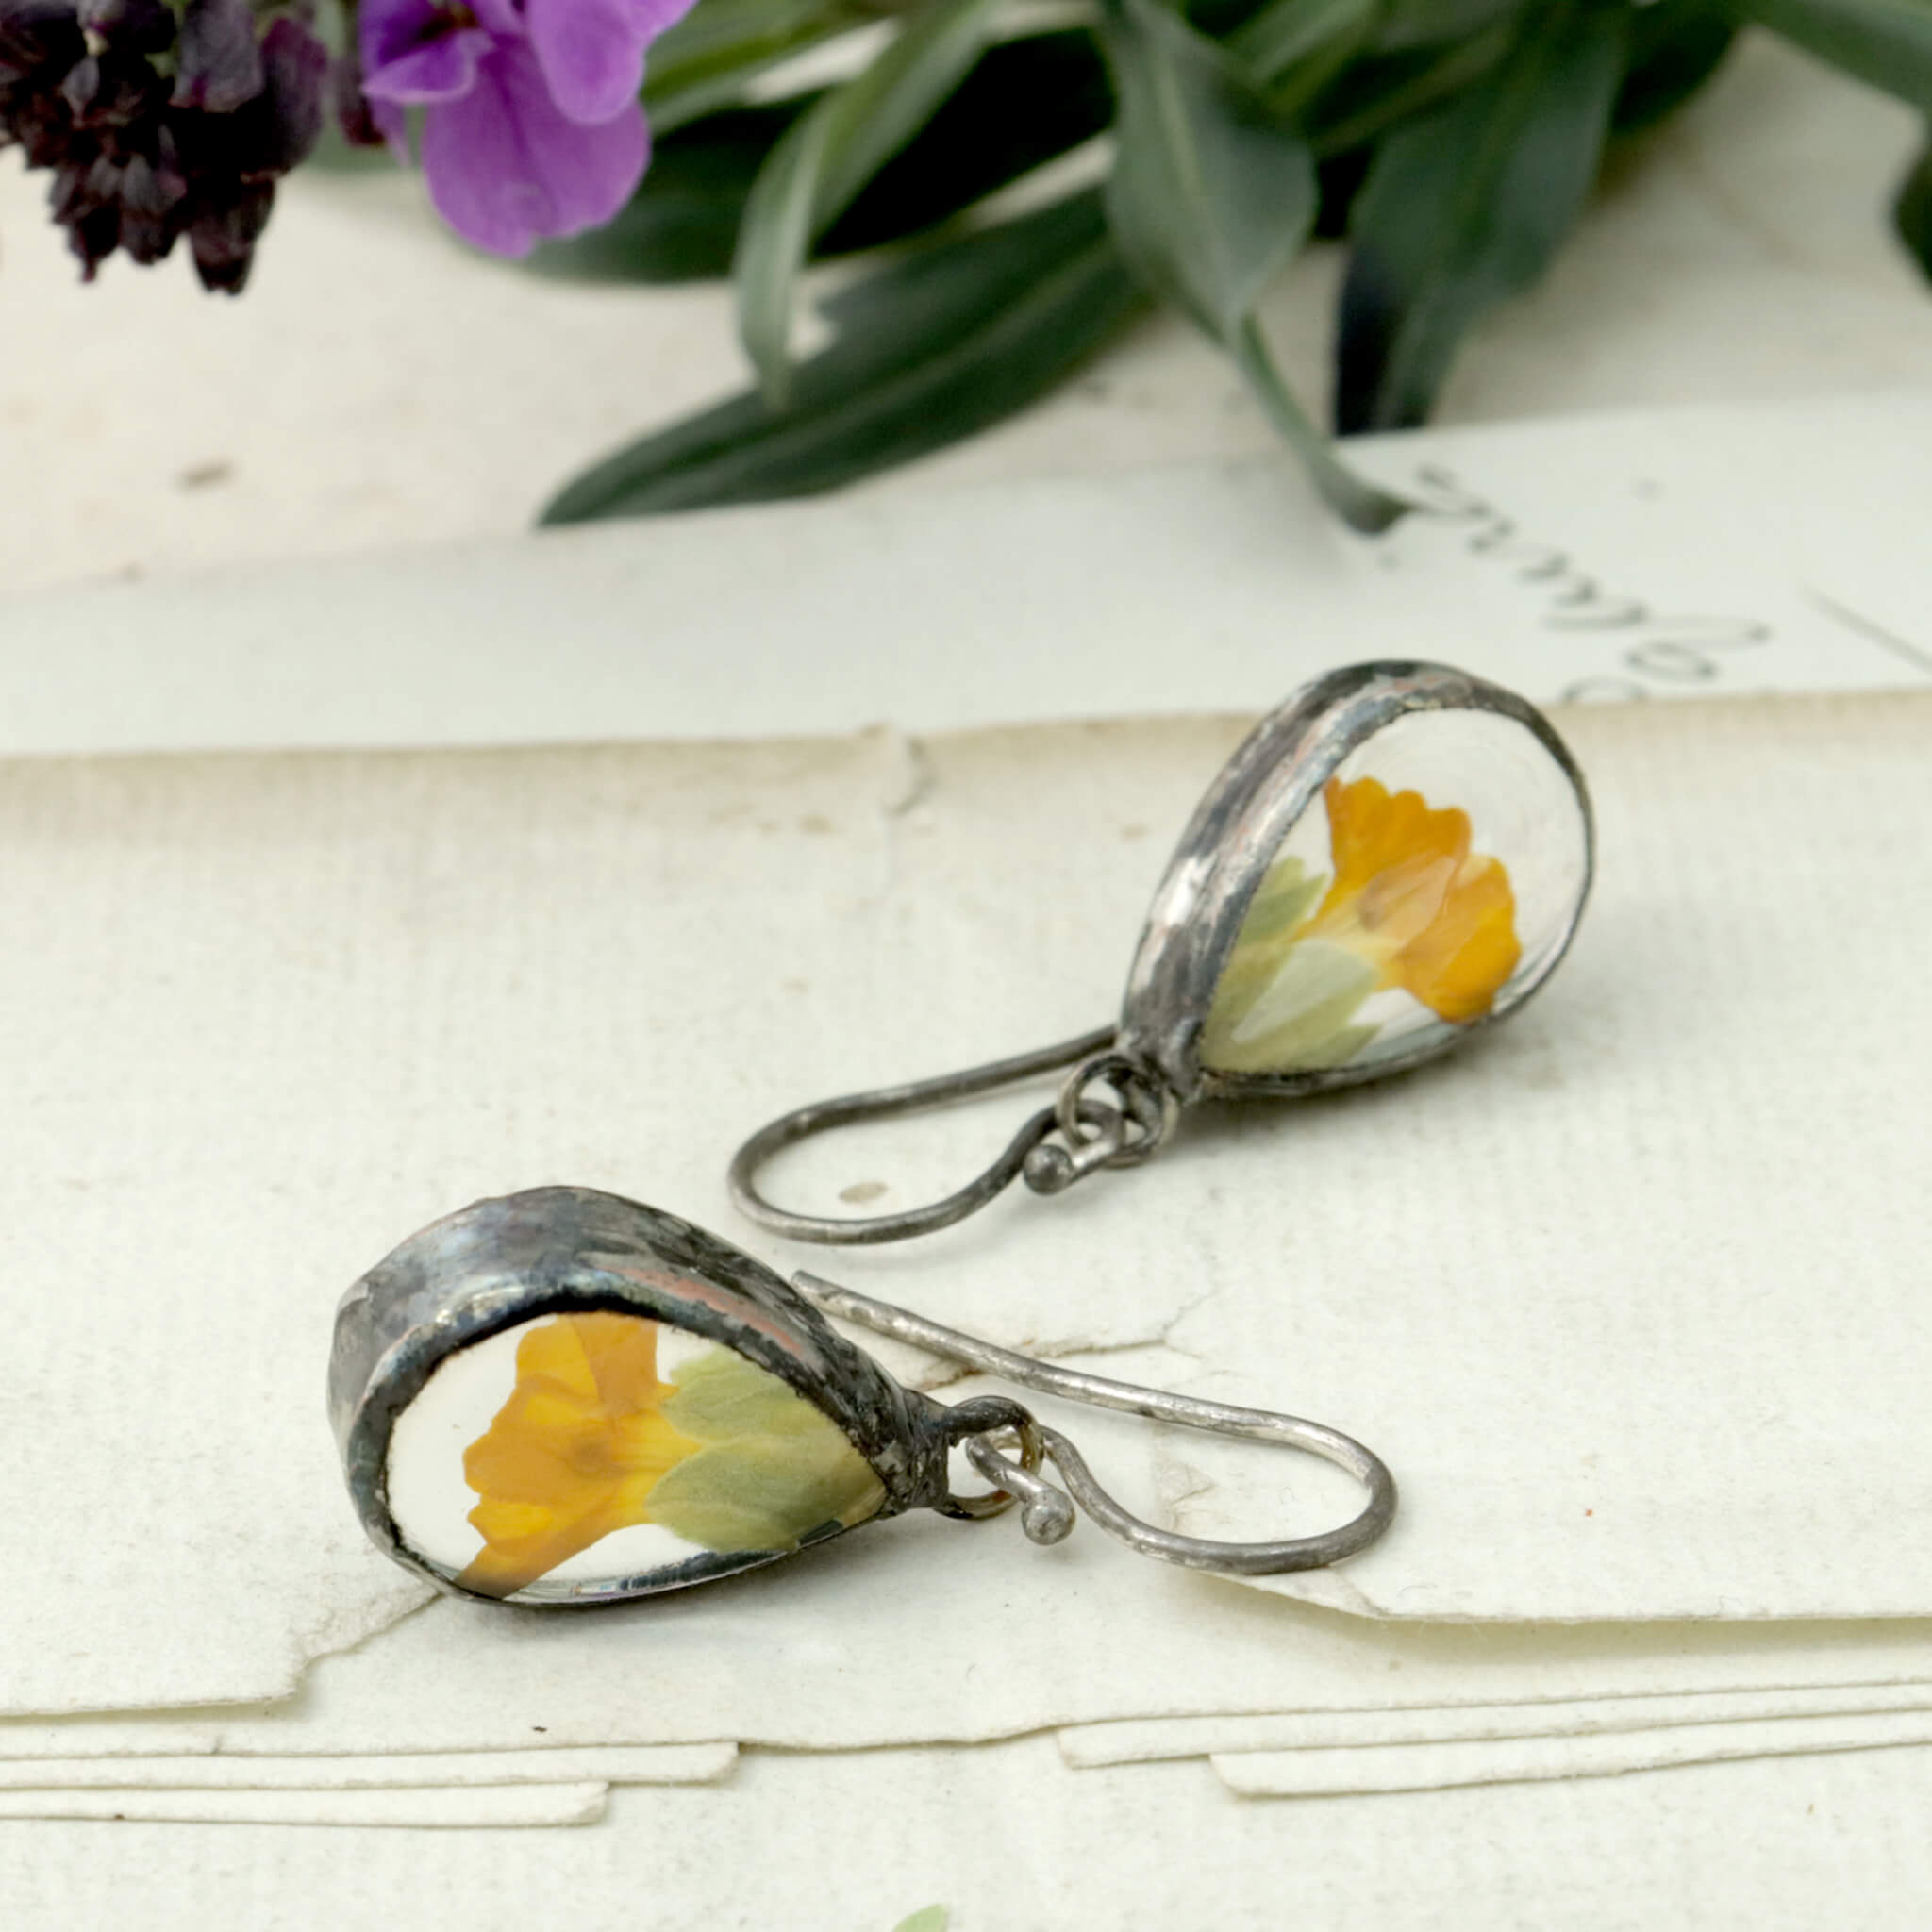 Earrings with real yellow primrose flowers lying on an old letter